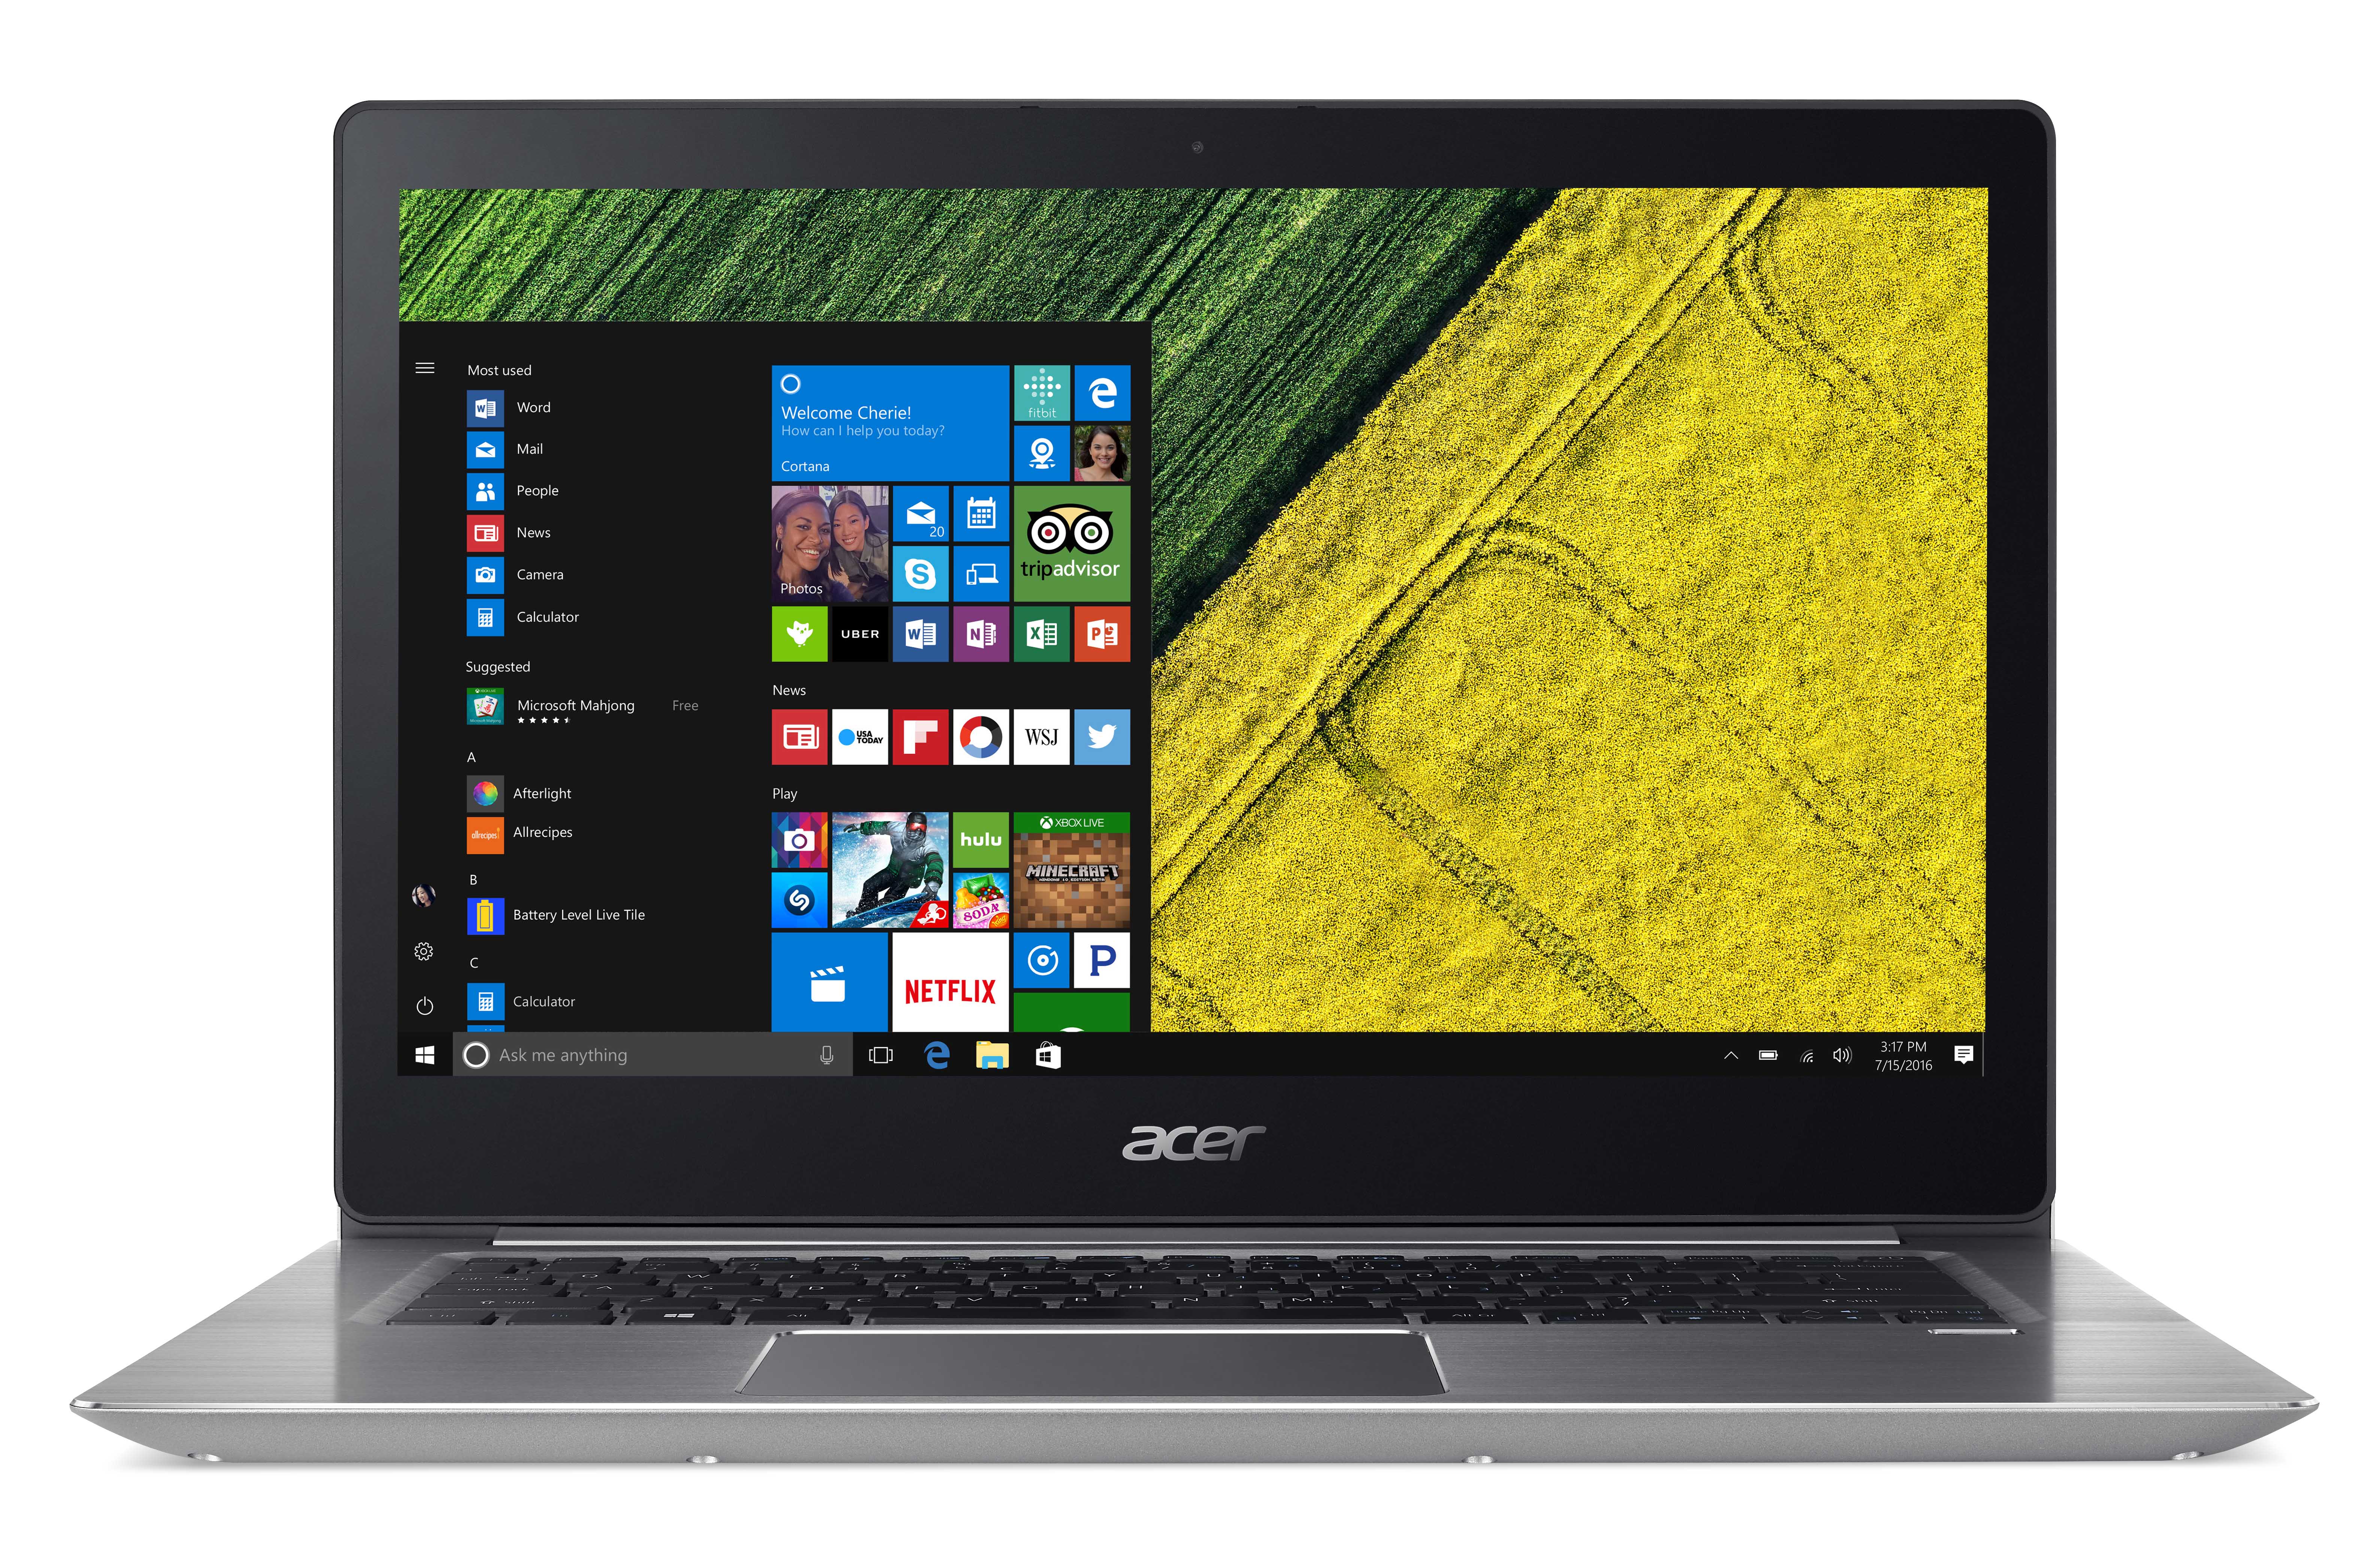 The Acer Swift 3 with Windows 10